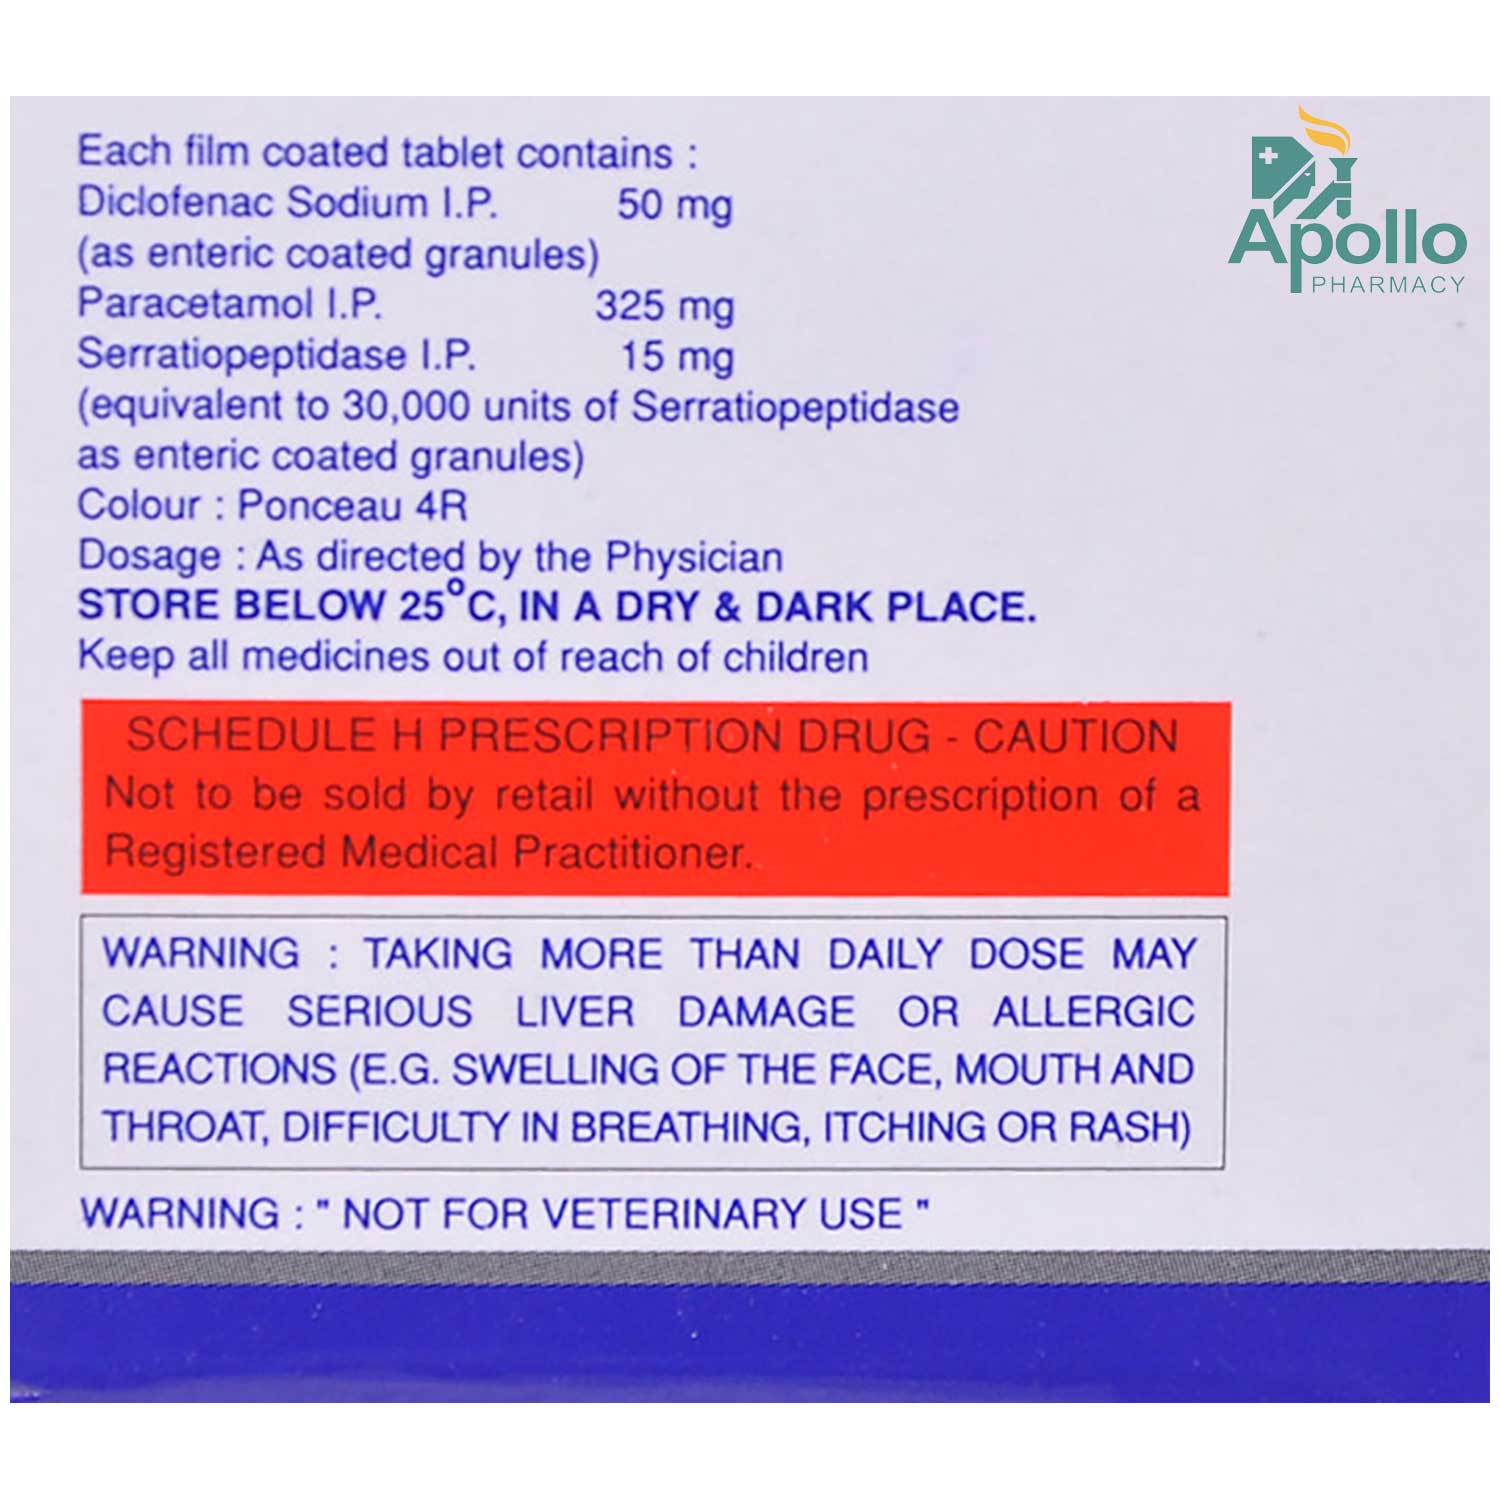 Diclogesic-SP Tablet | Uses, Side Effects, Price | Apollo Pharmacy